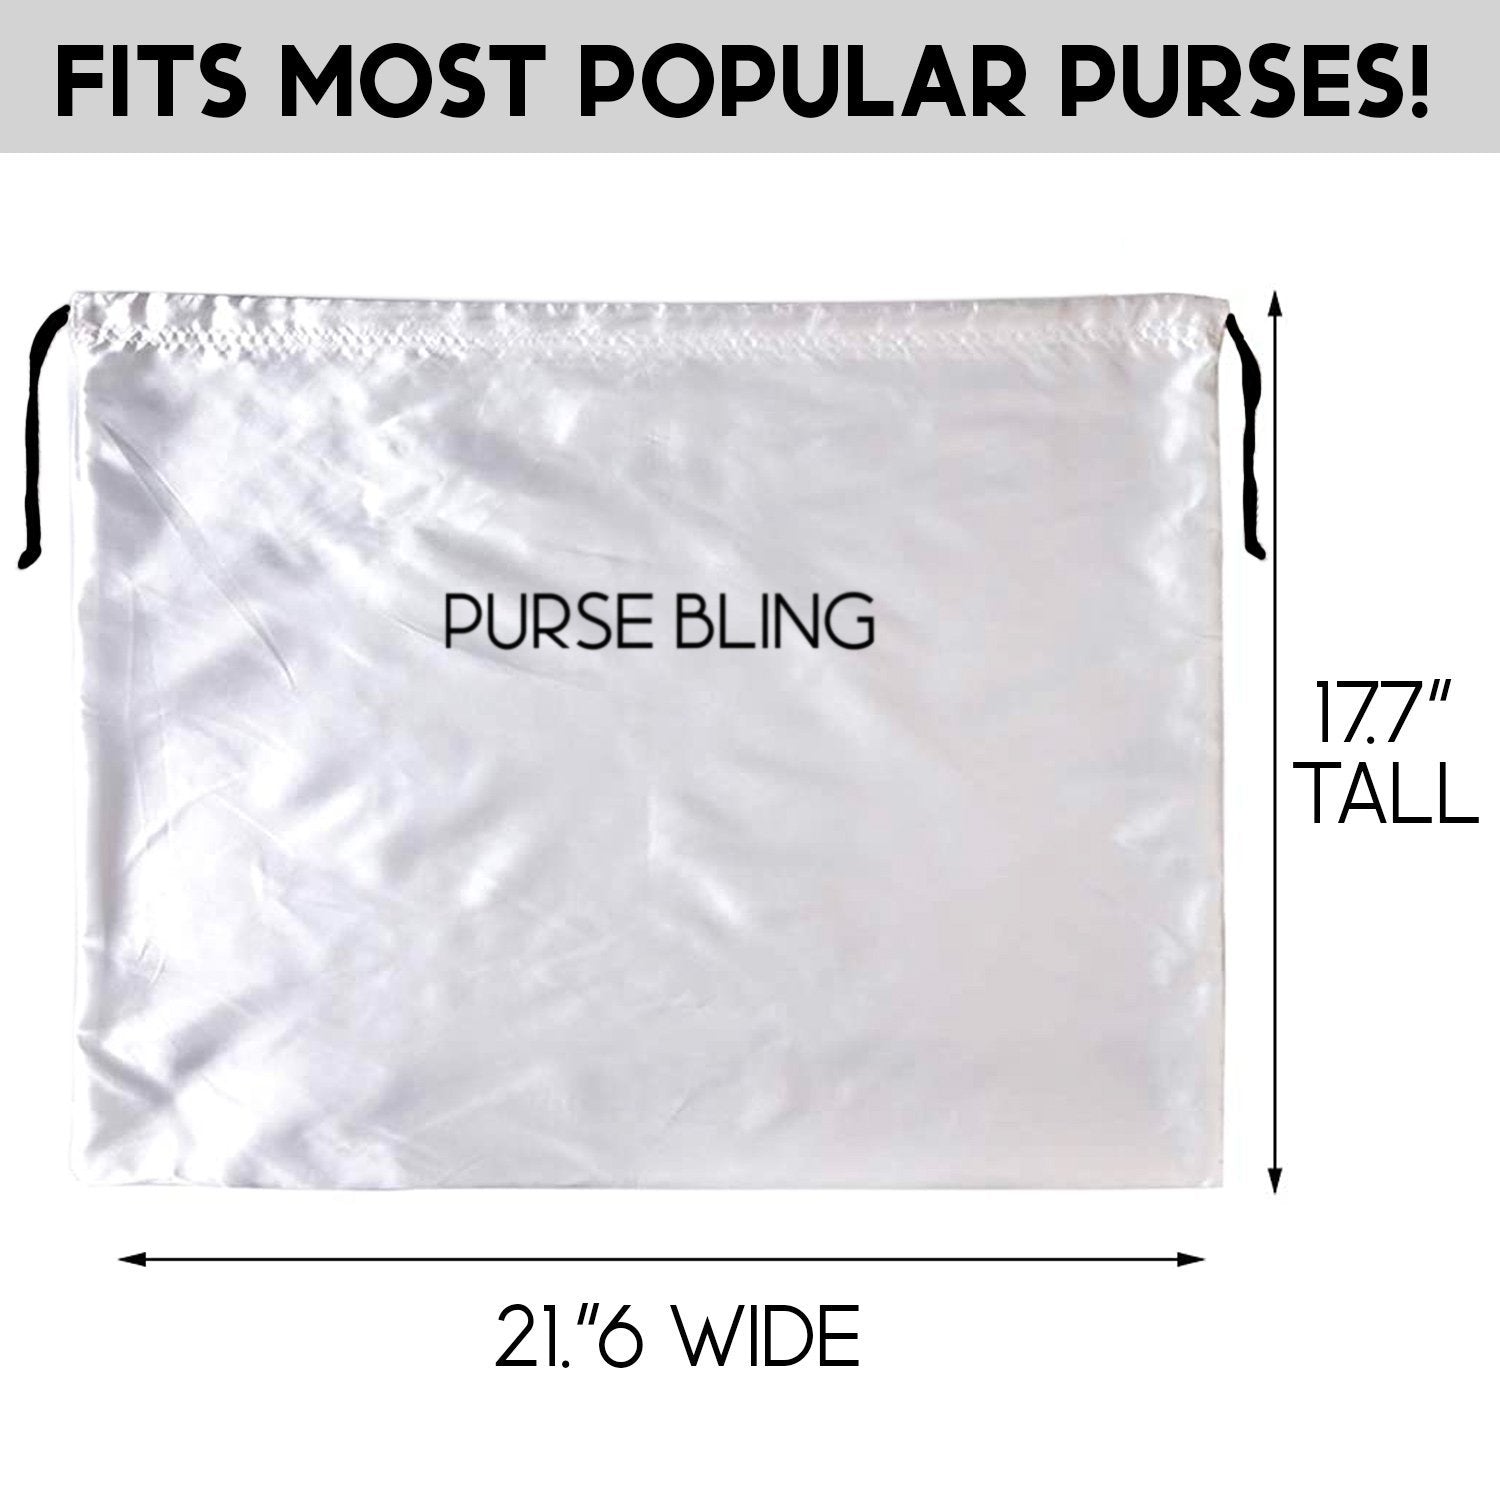 12 Pcs Silk Purse Organizer Dust Cover Drawstring Bags Shoe Bag for Travel  Satin Dust Bags for Purses Handbags Shoes Boots,White(19.6 * 15.7 in)